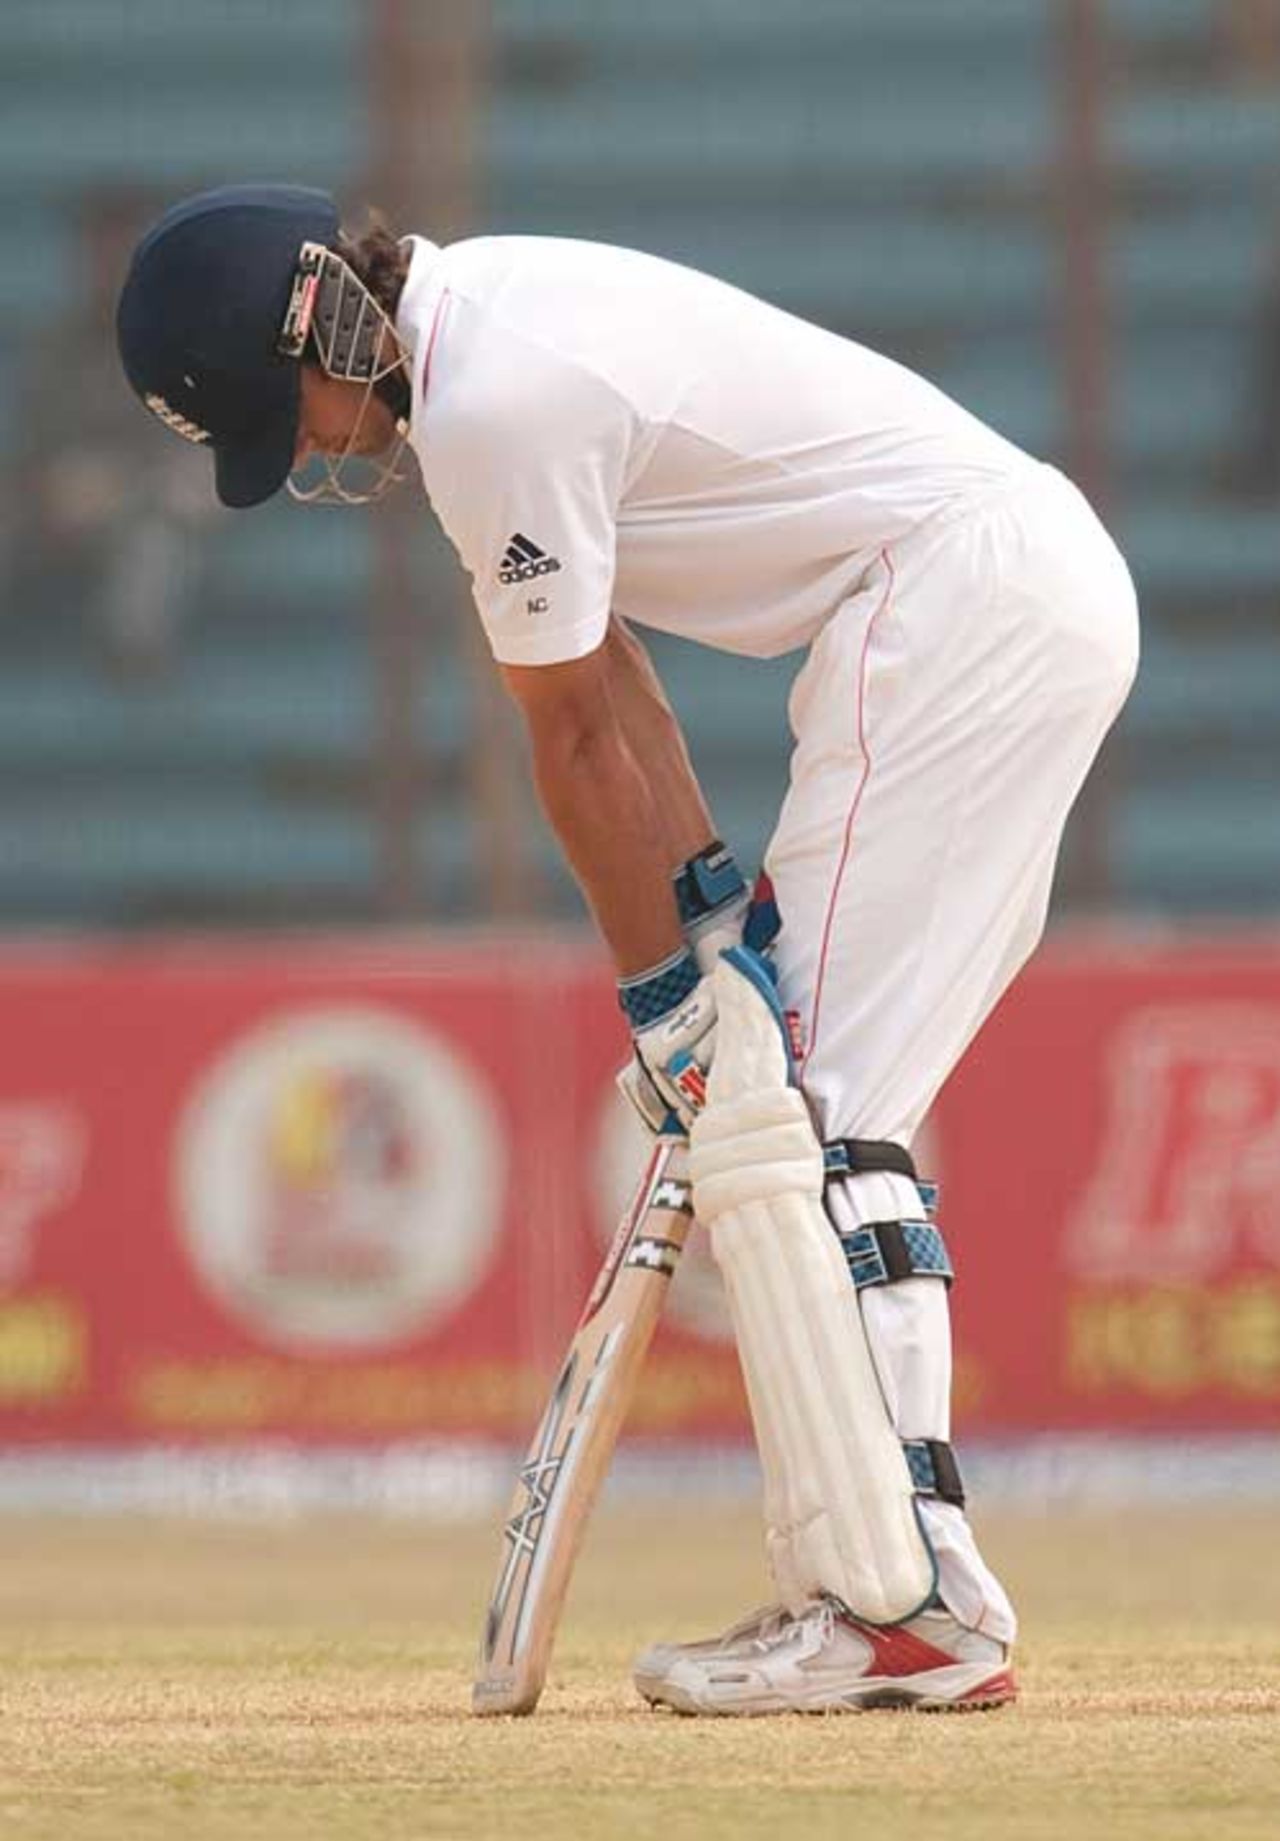 Alastair Cook couldn't believe out he was dismissed, Bangladesh v England, 1st Test, Chittagong, March 13, 2010